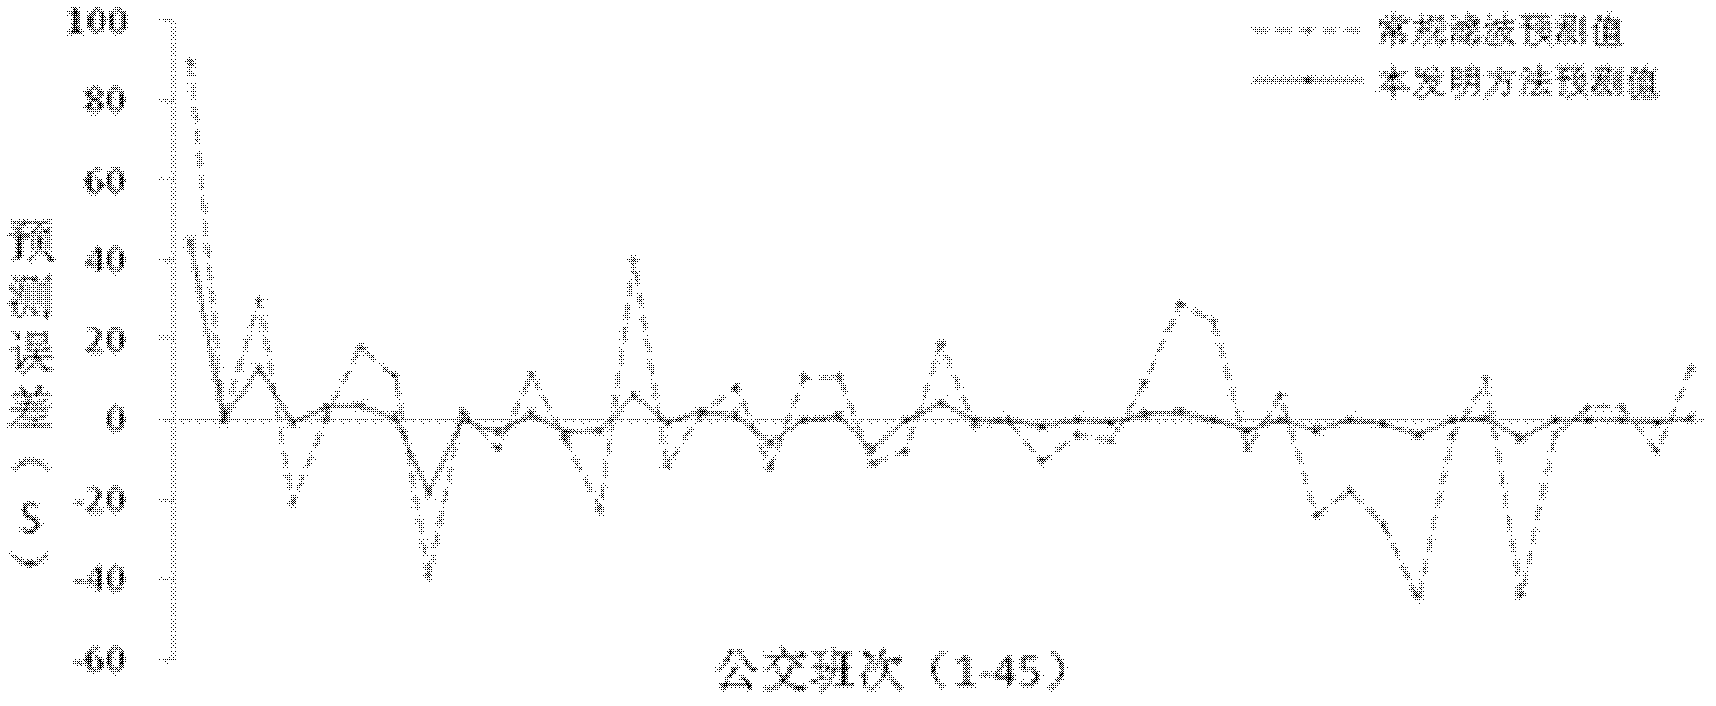 Method for forecasting travel time between bus stops